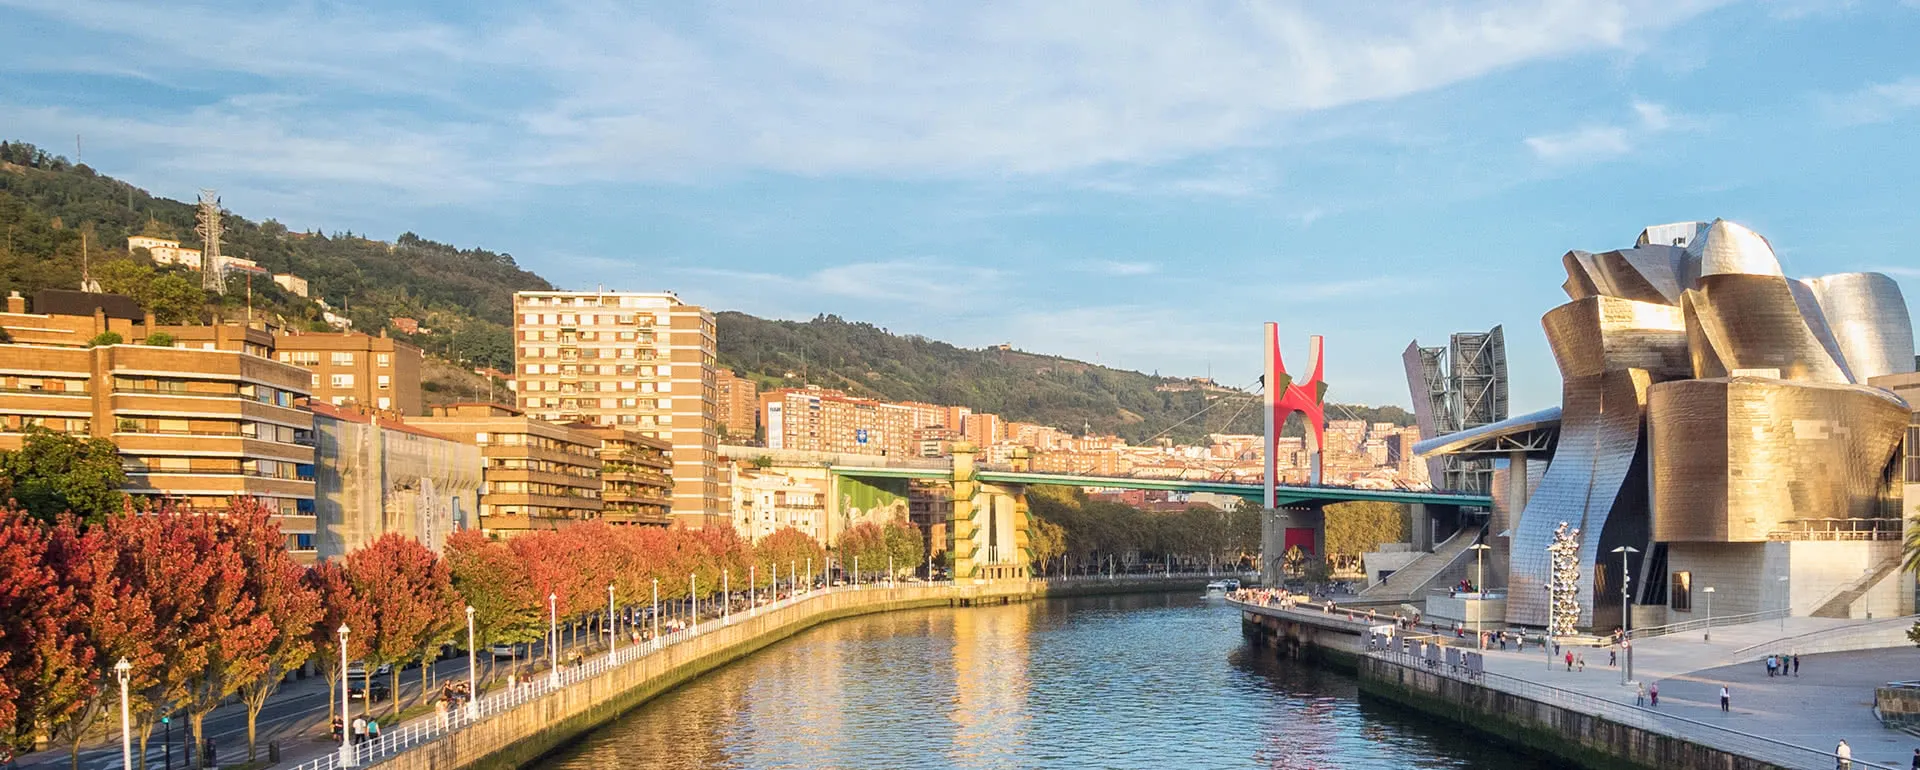 Bilbao - the destination with youth hostels